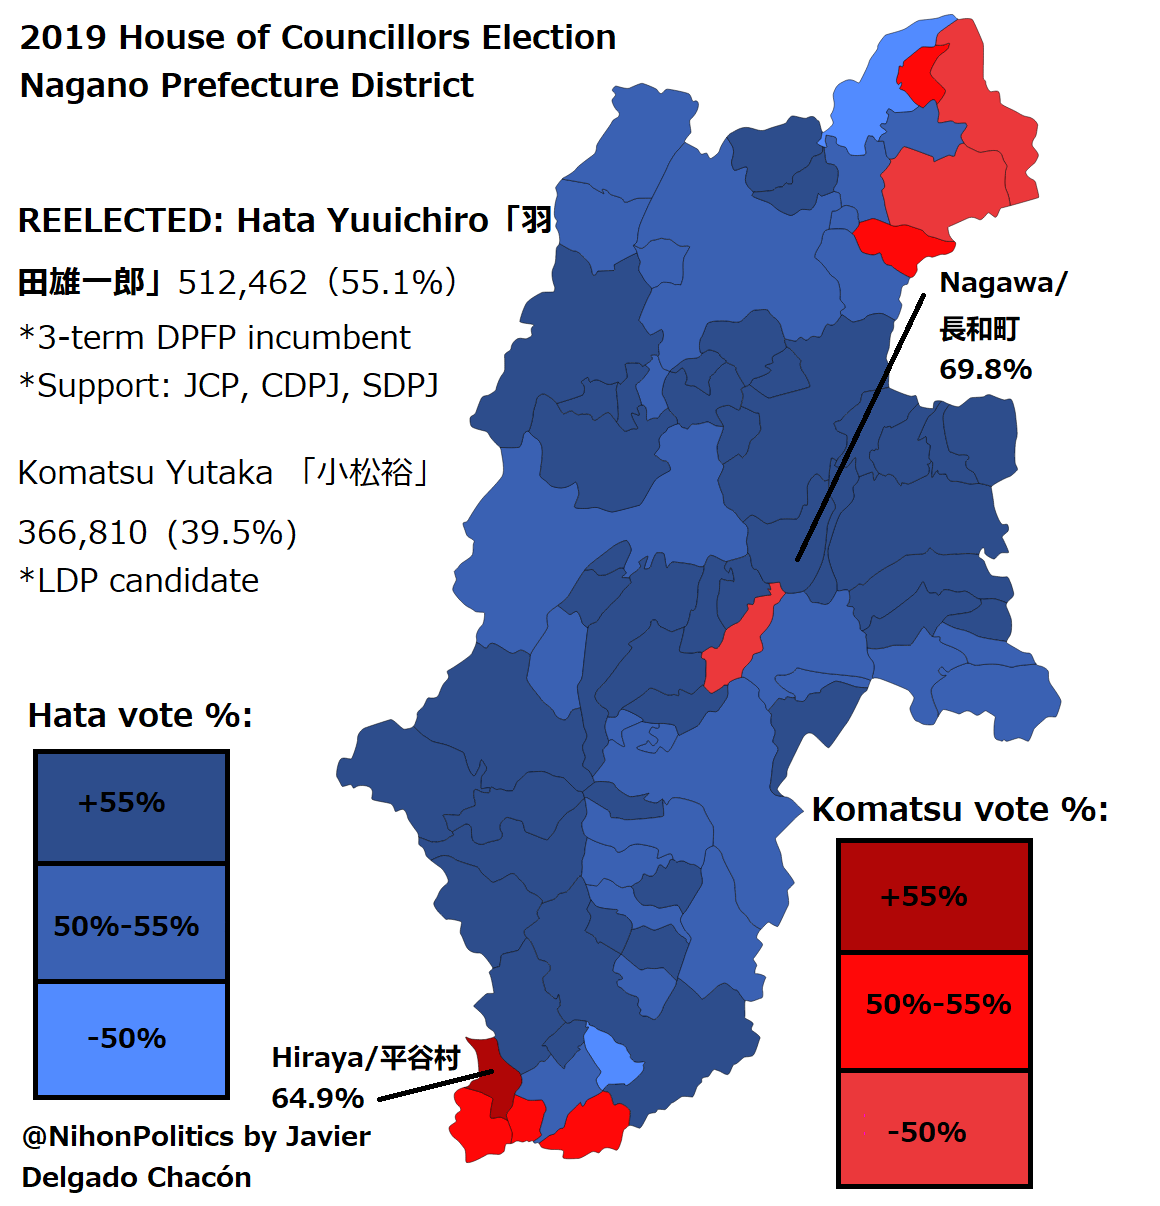 2019 Hoc Nagano District Election Results